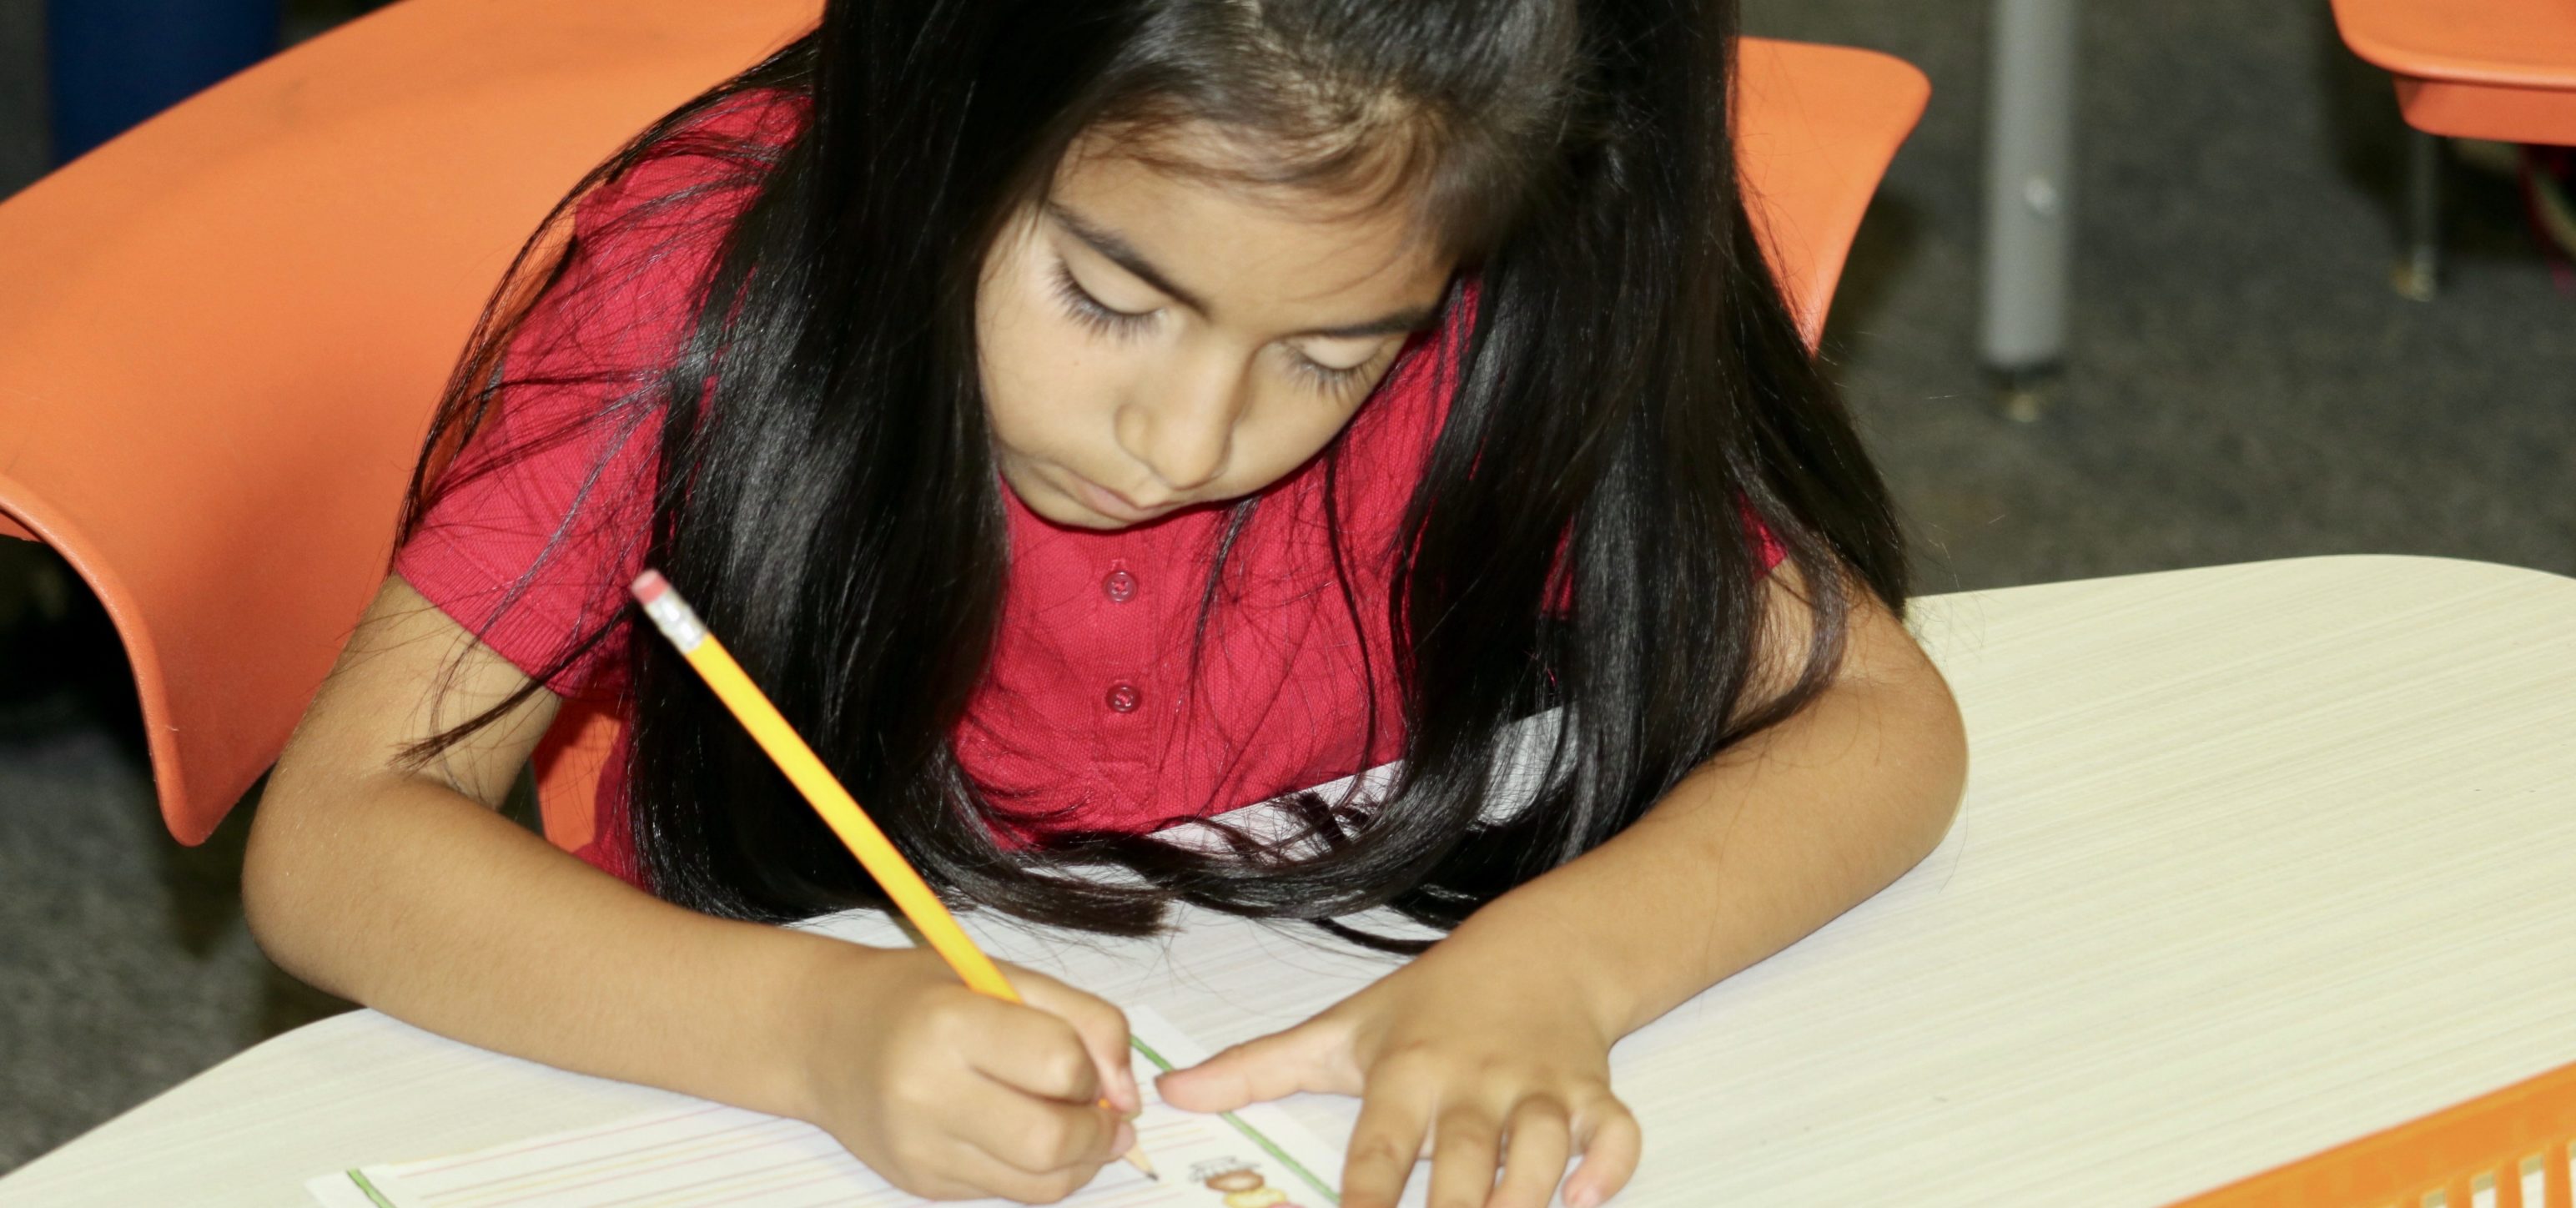 Girl in first grade concentrates on her schoolwork.